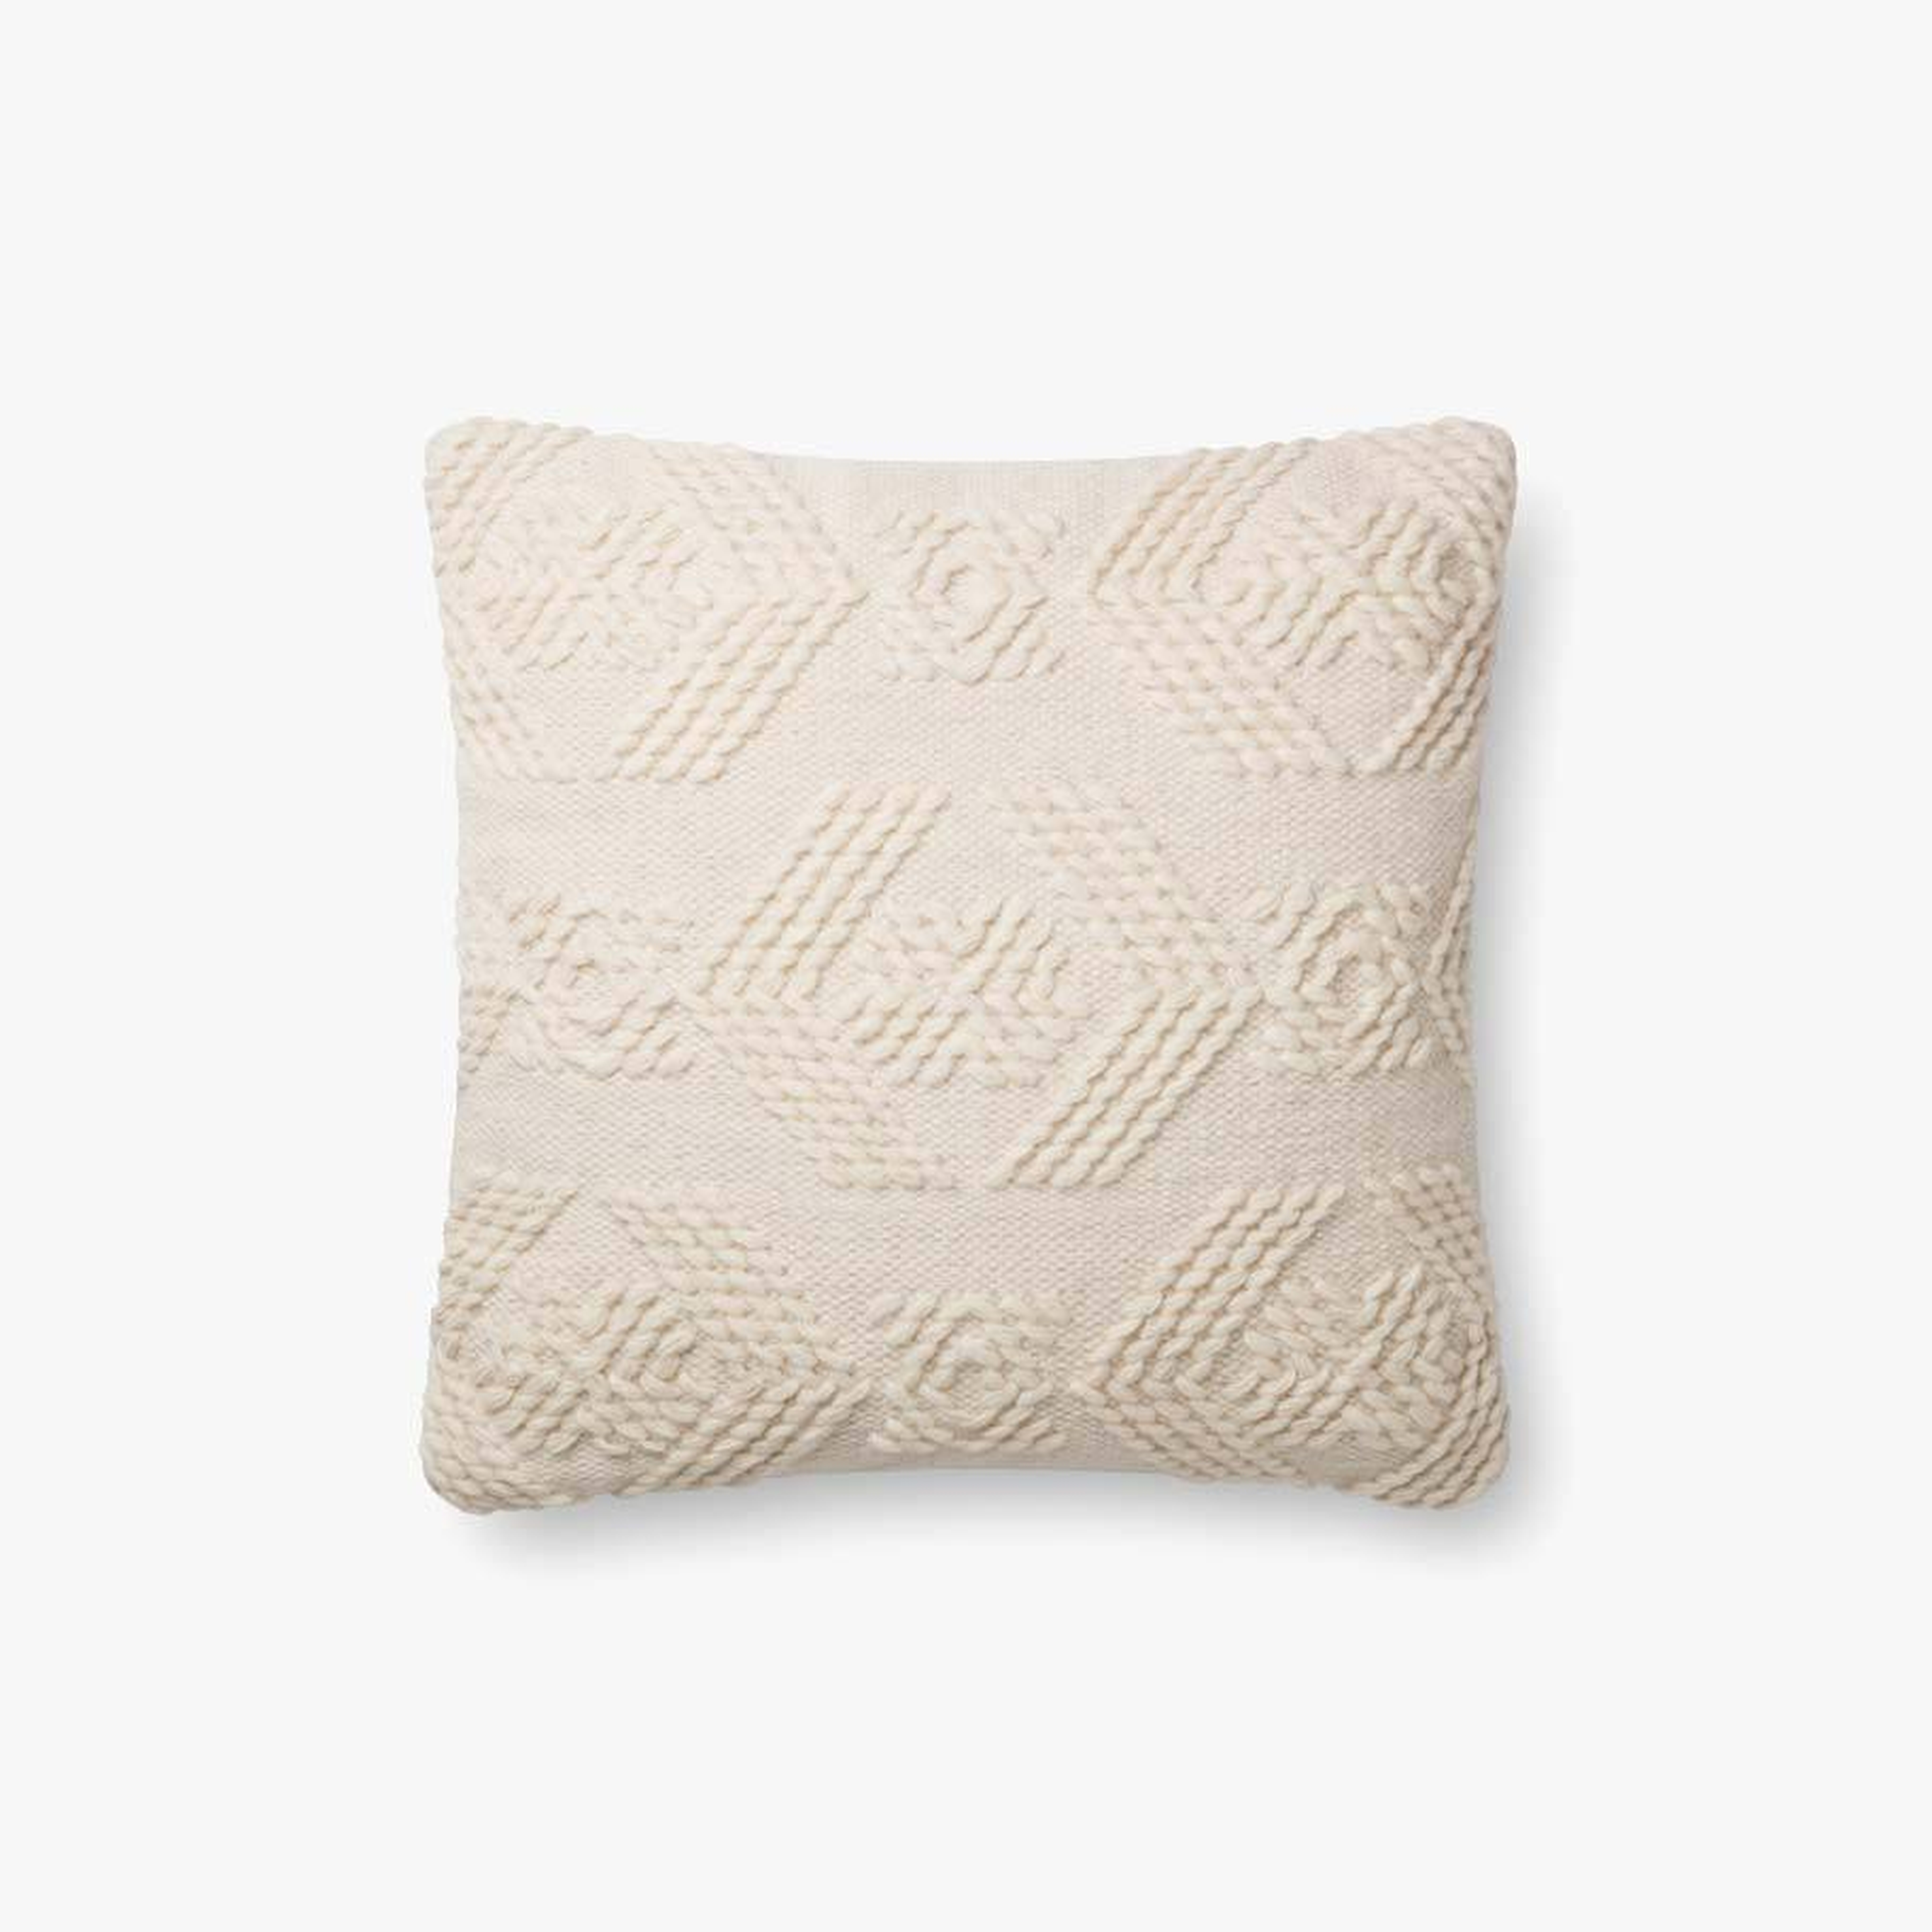 Embroidered Cream Throw Pillow, Poly Fill, 18" x 18" - Loloi Rugs